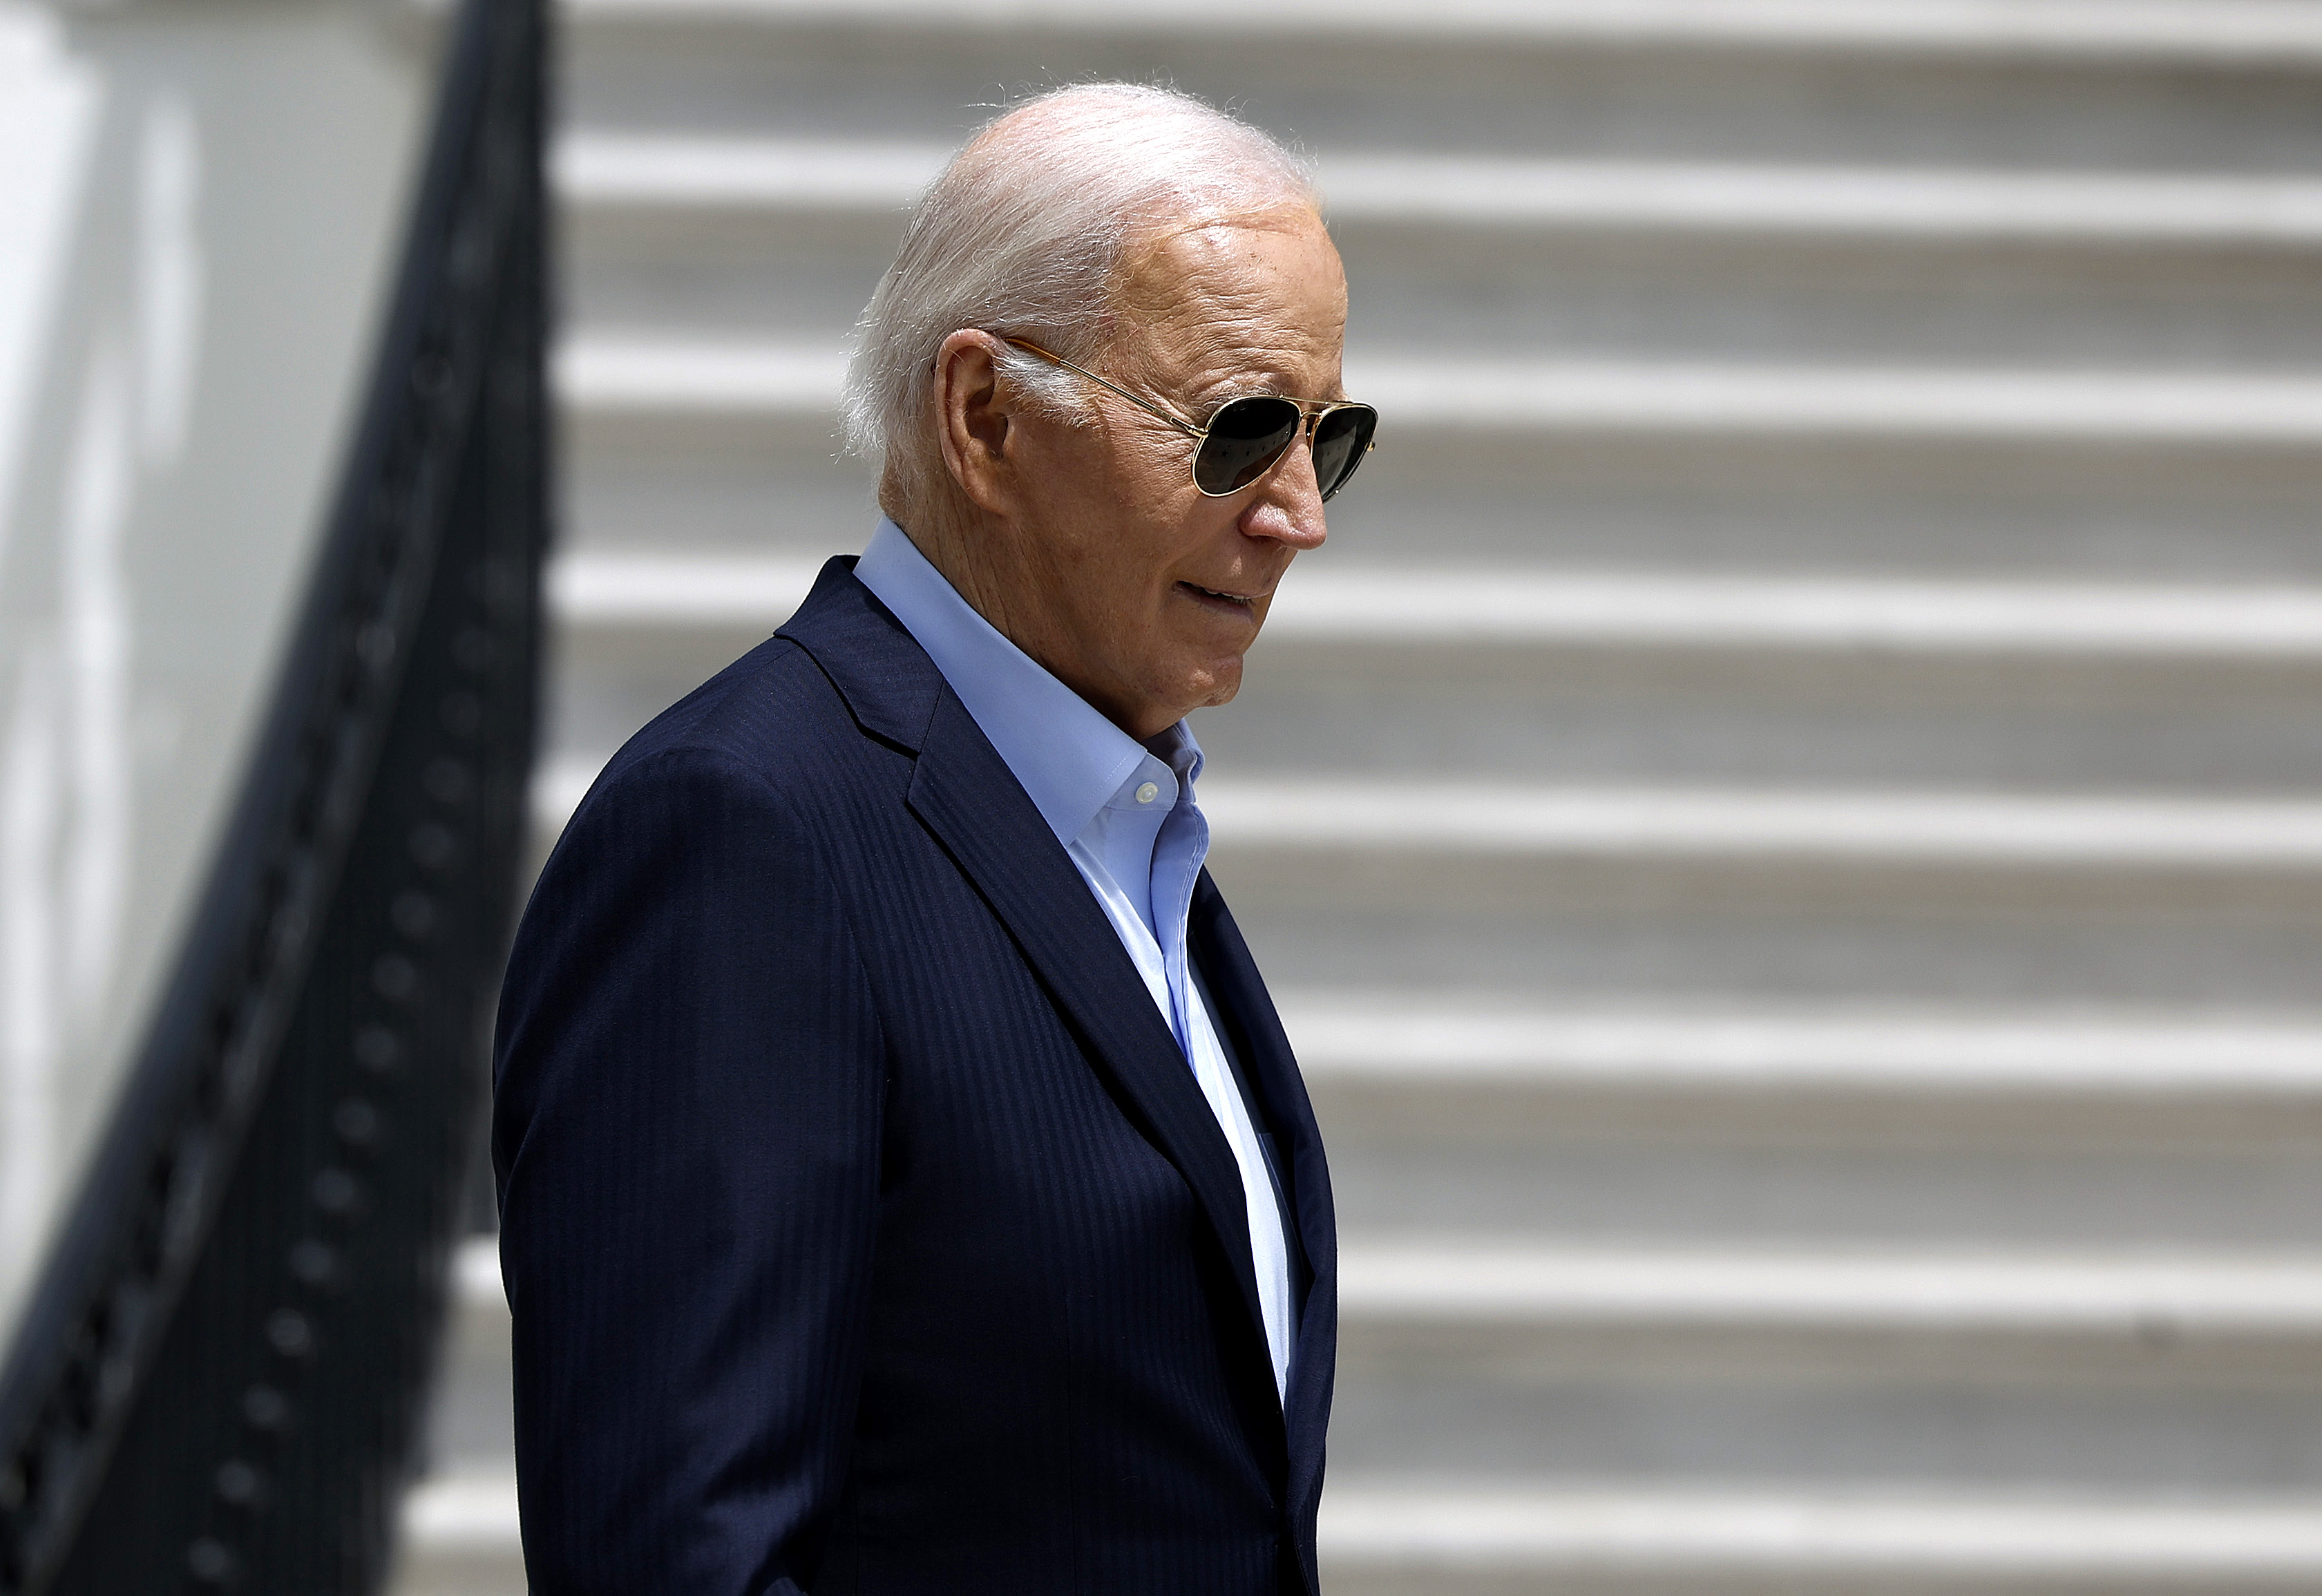 Joe Biden’s approval rating falls to all-time low